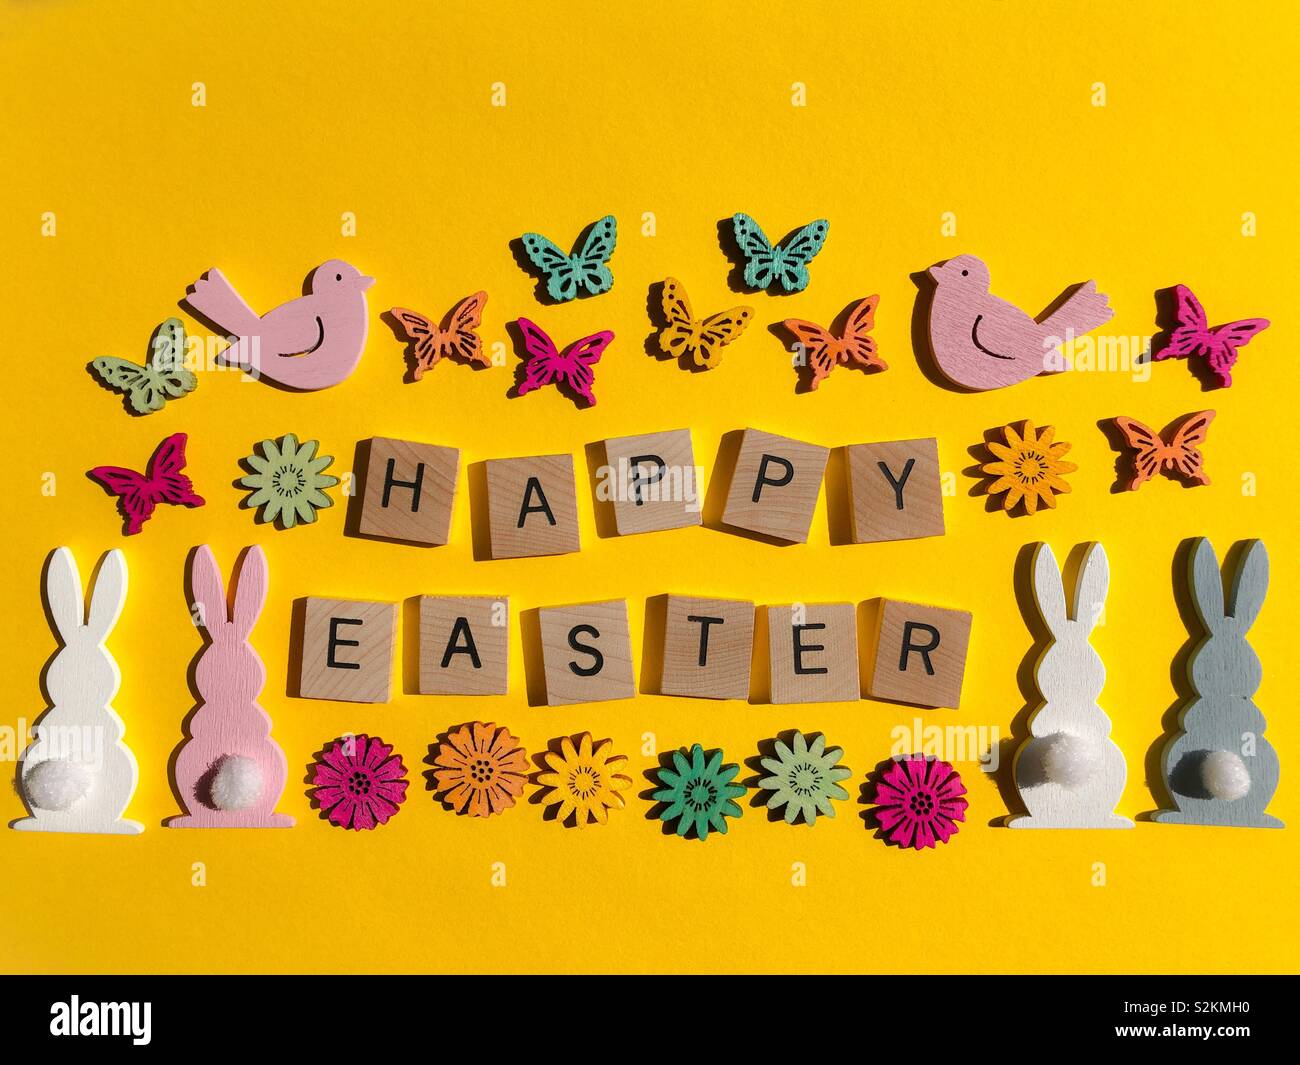 Happy Easter, in wooden letters with bunny rabbits, birds, flowers and butterflies Stock Photo